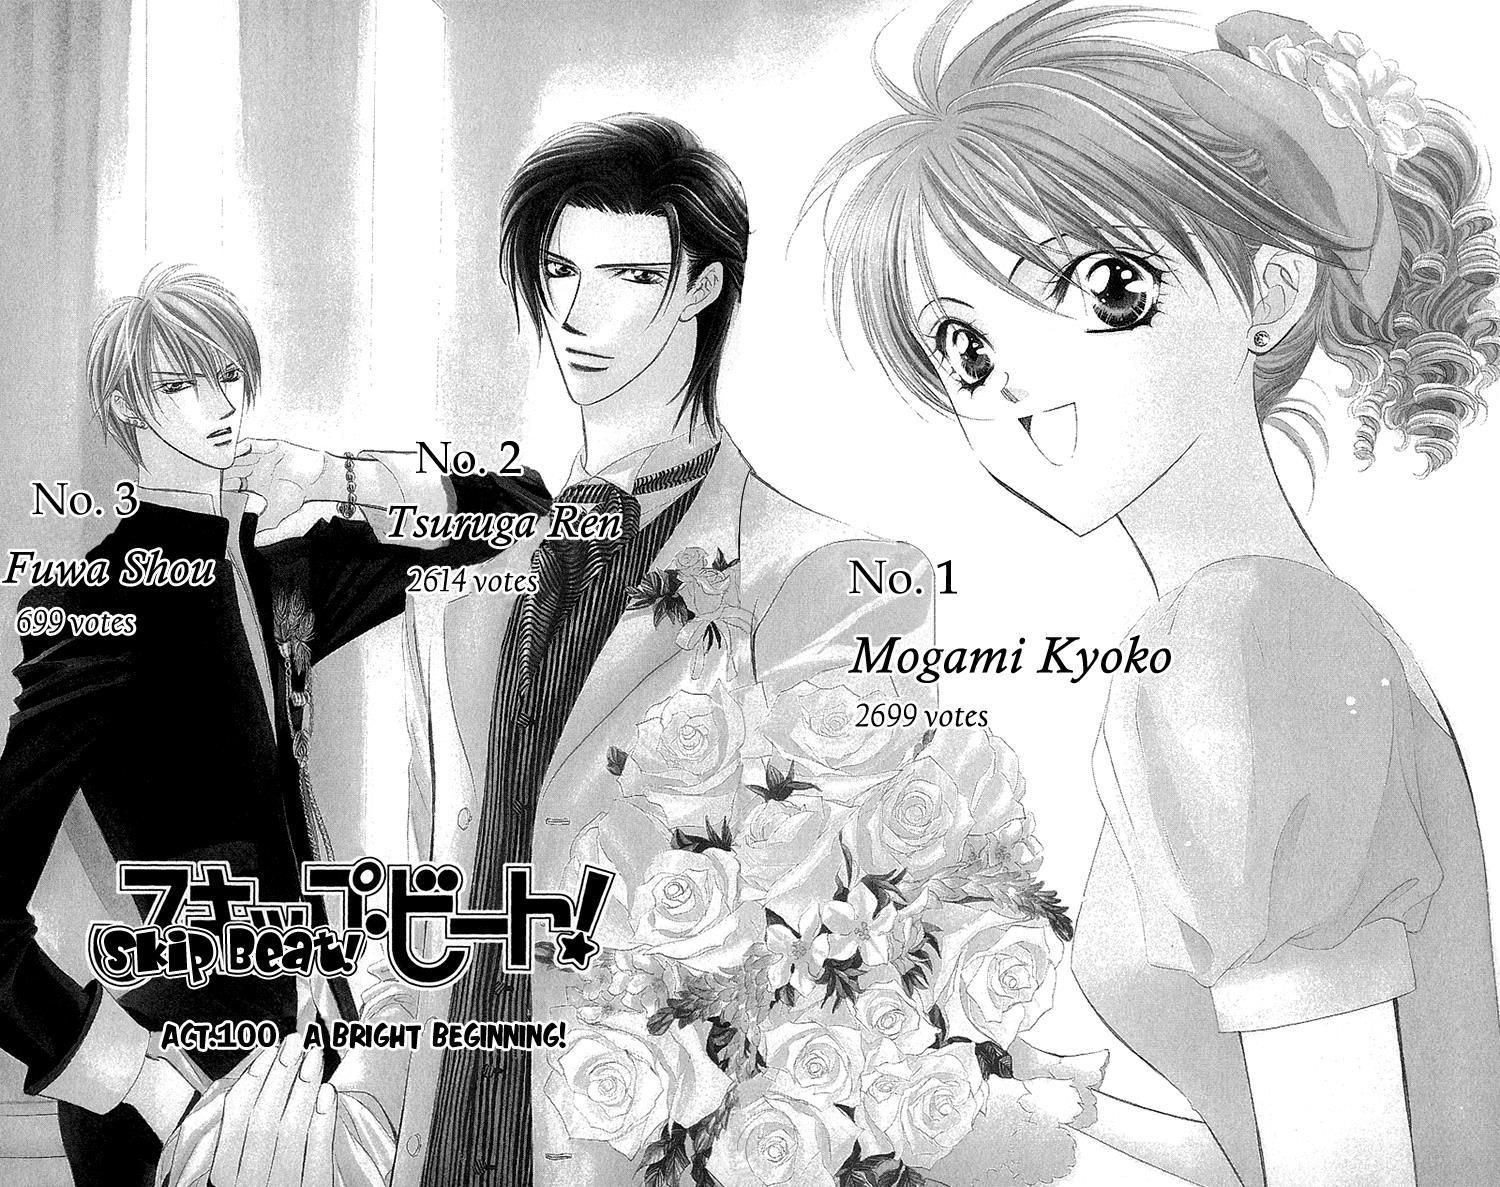 Skip Beat!, Chapter 100 Off to a Good Start! image 02